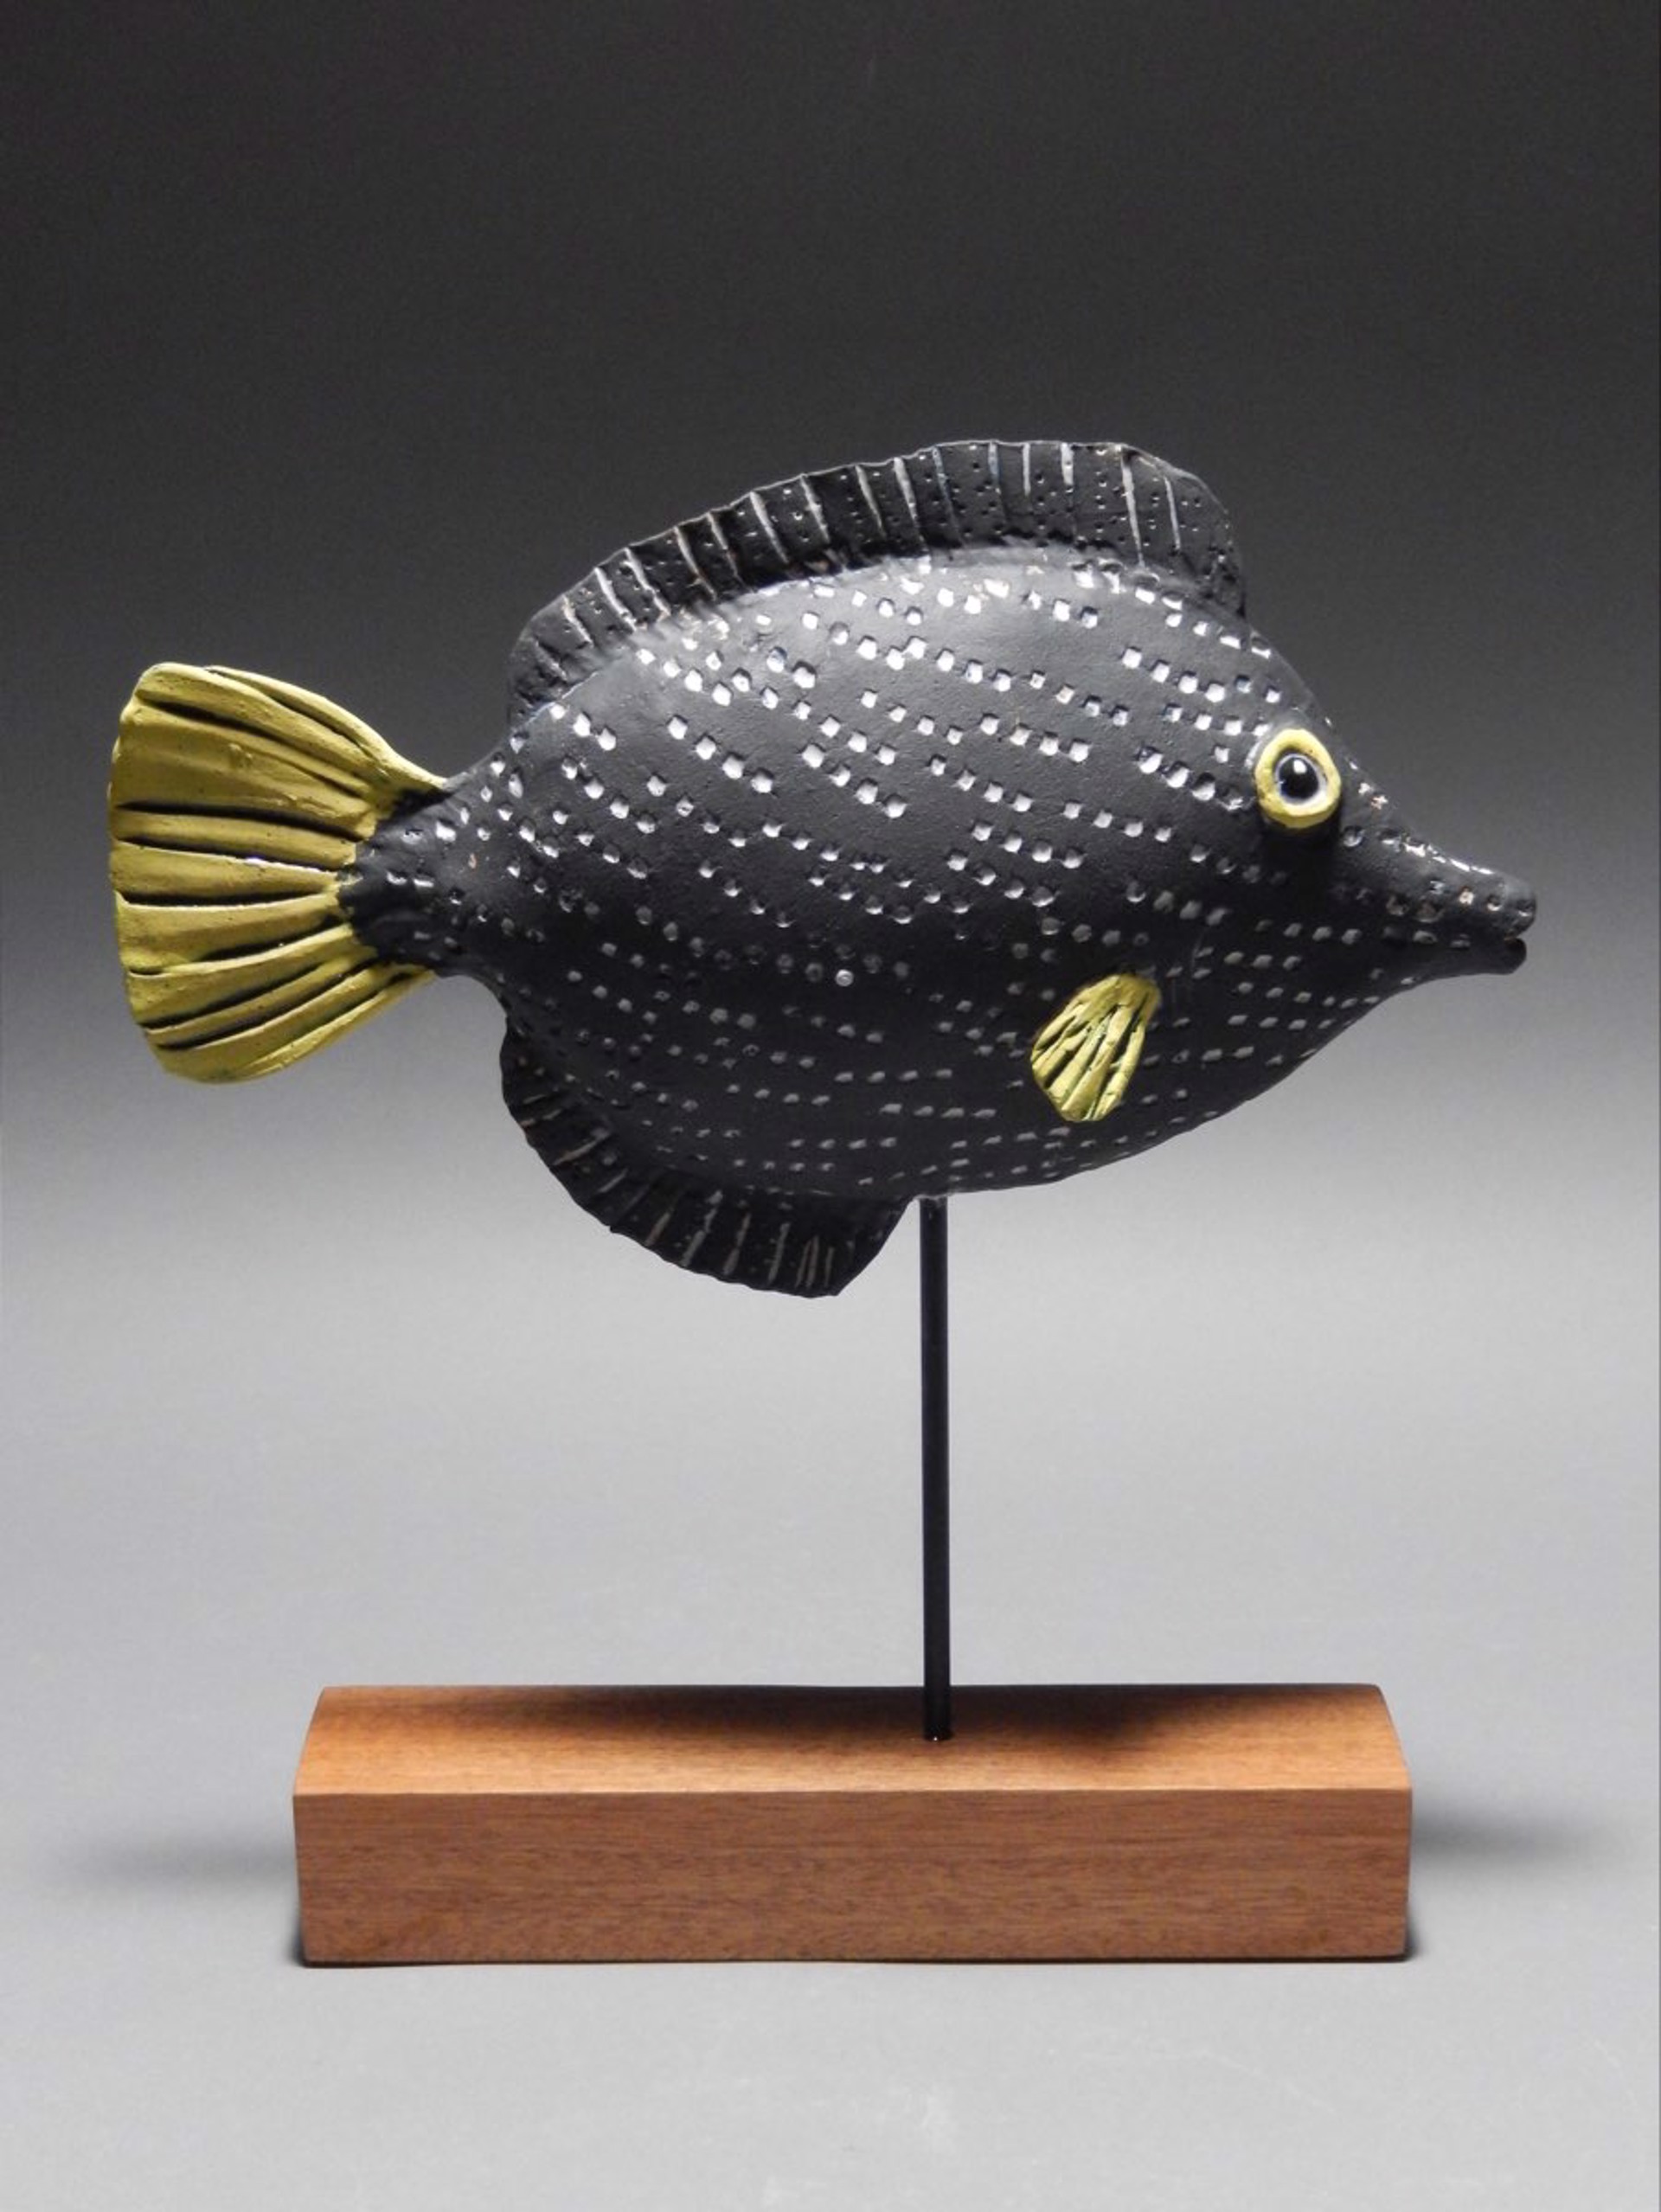 Black And White Fish by Janet Leazenby